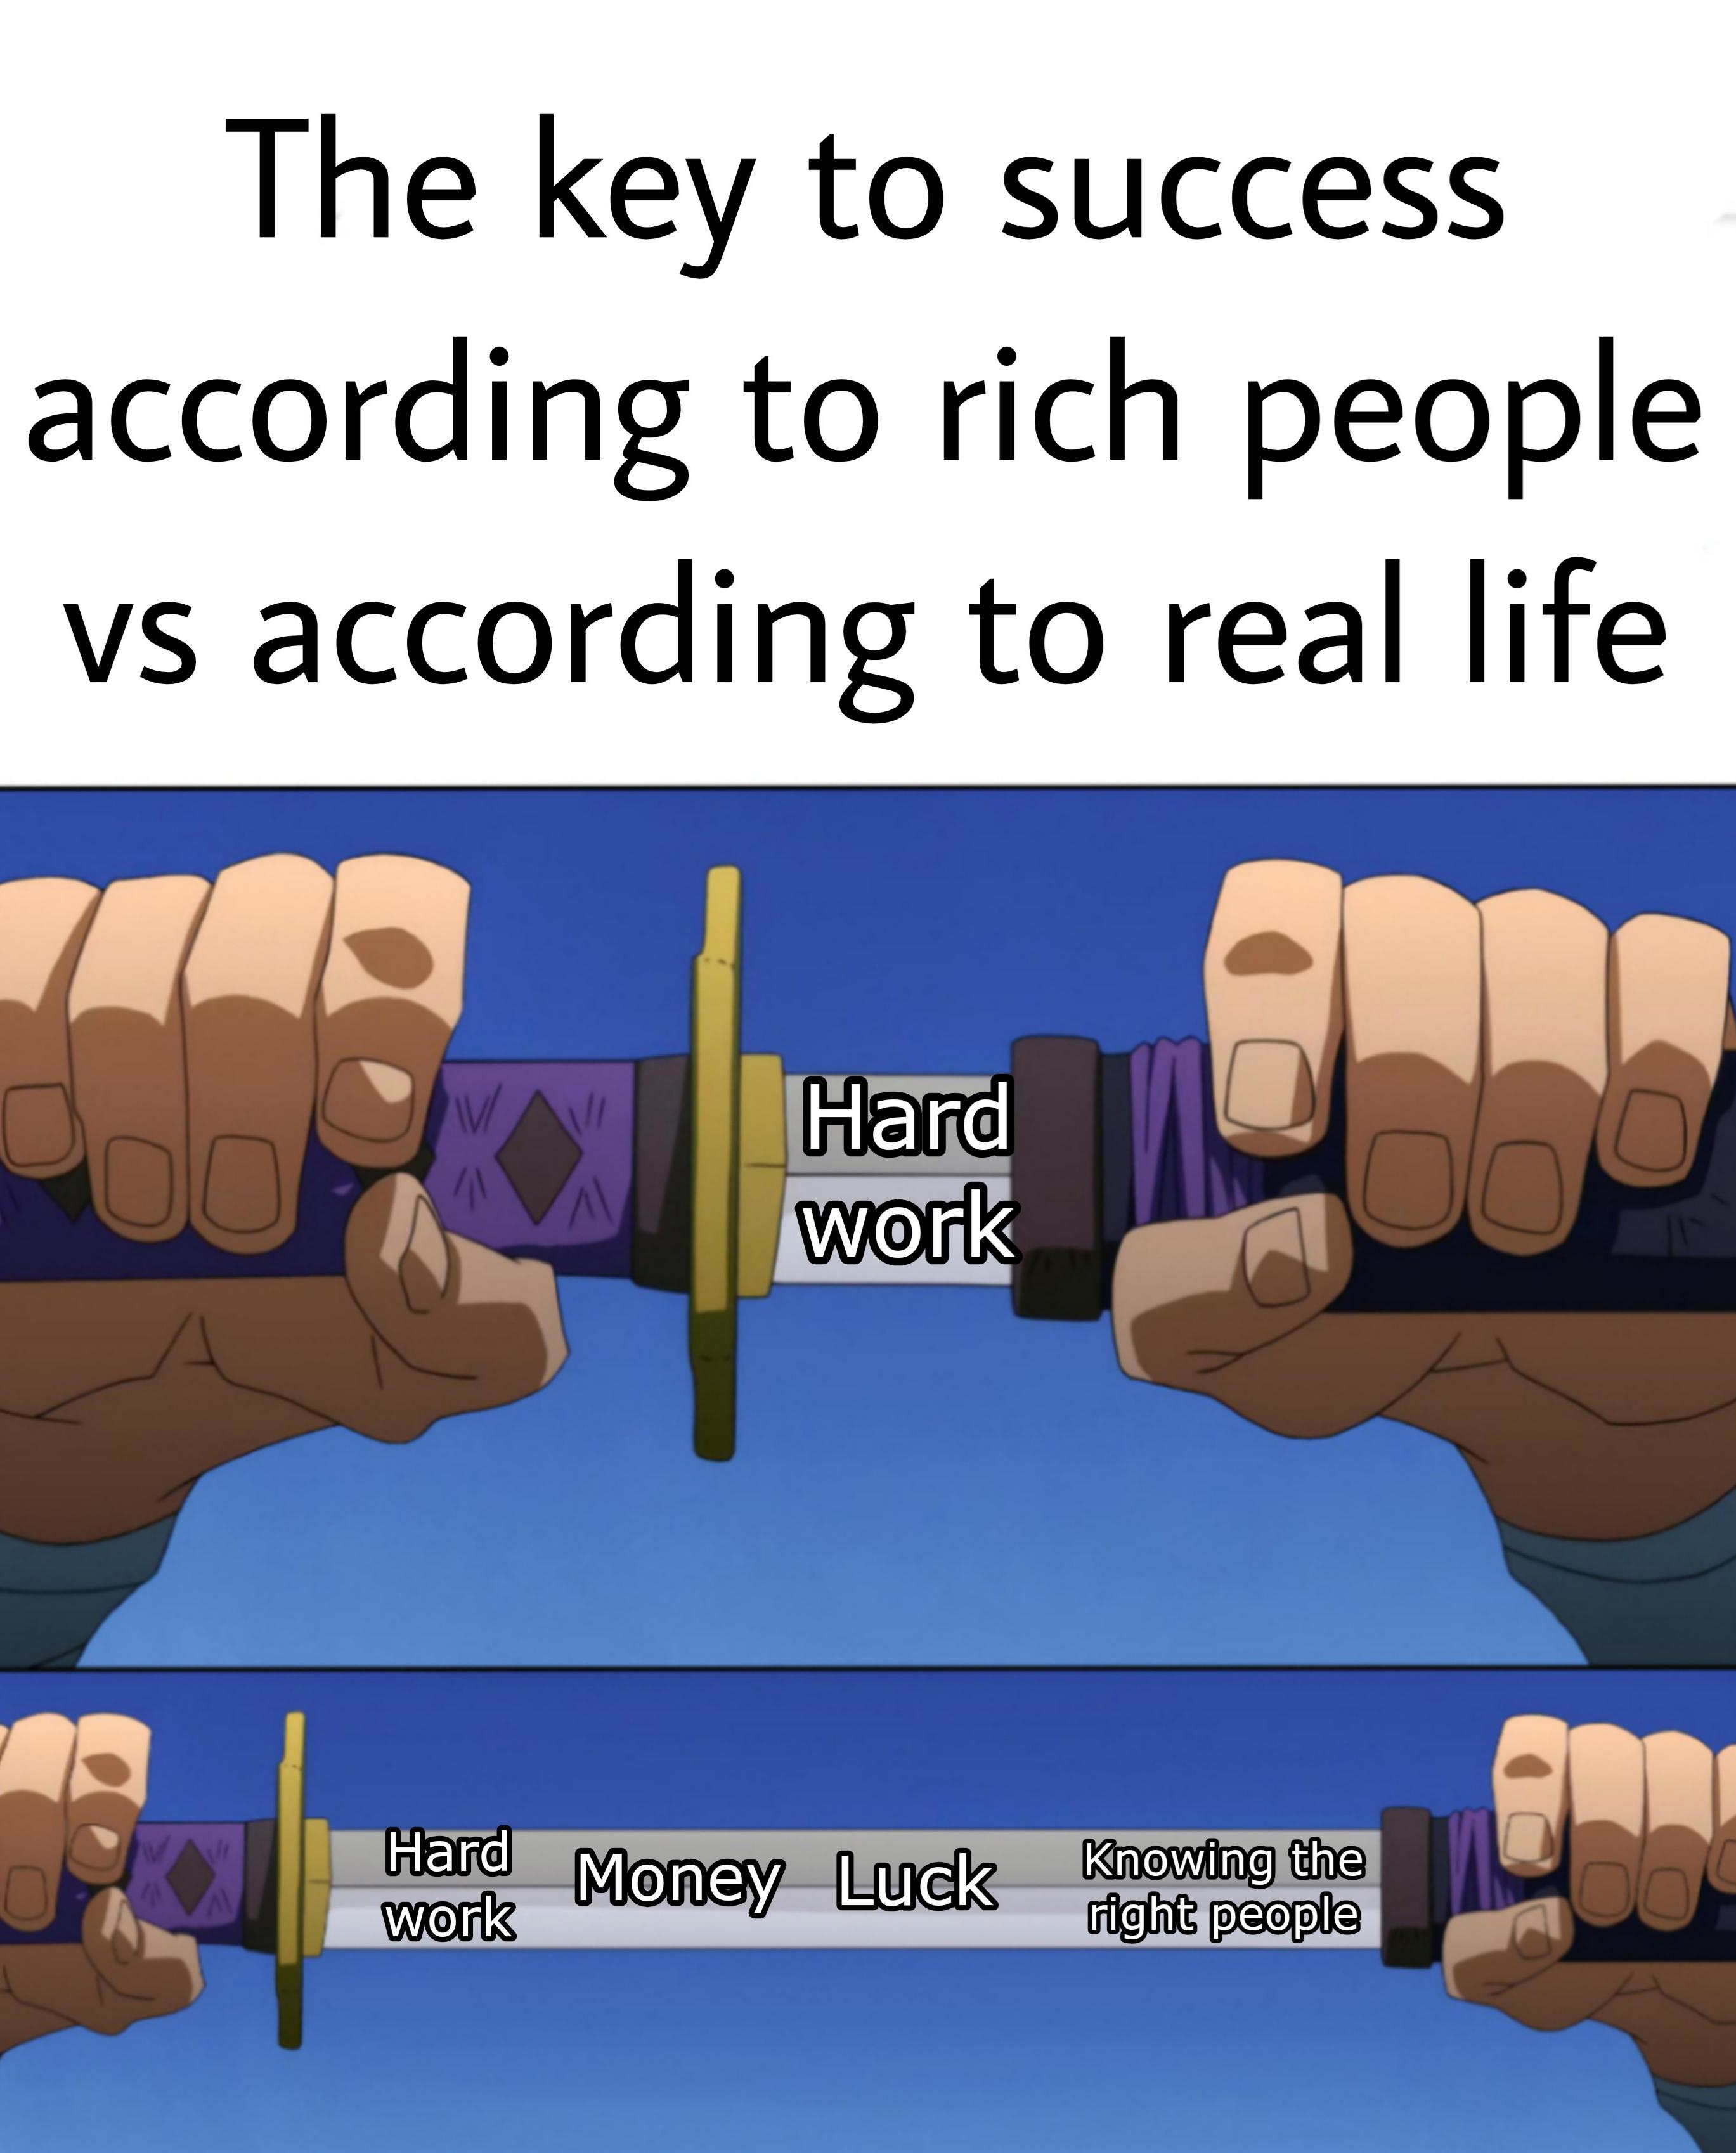 trending memes - sword unsheathing meme - The key to success according to rich people vs according to real life 6 Tab 766 In W 11 11 11 Hard work Hard work Money Luck Knowing the right people